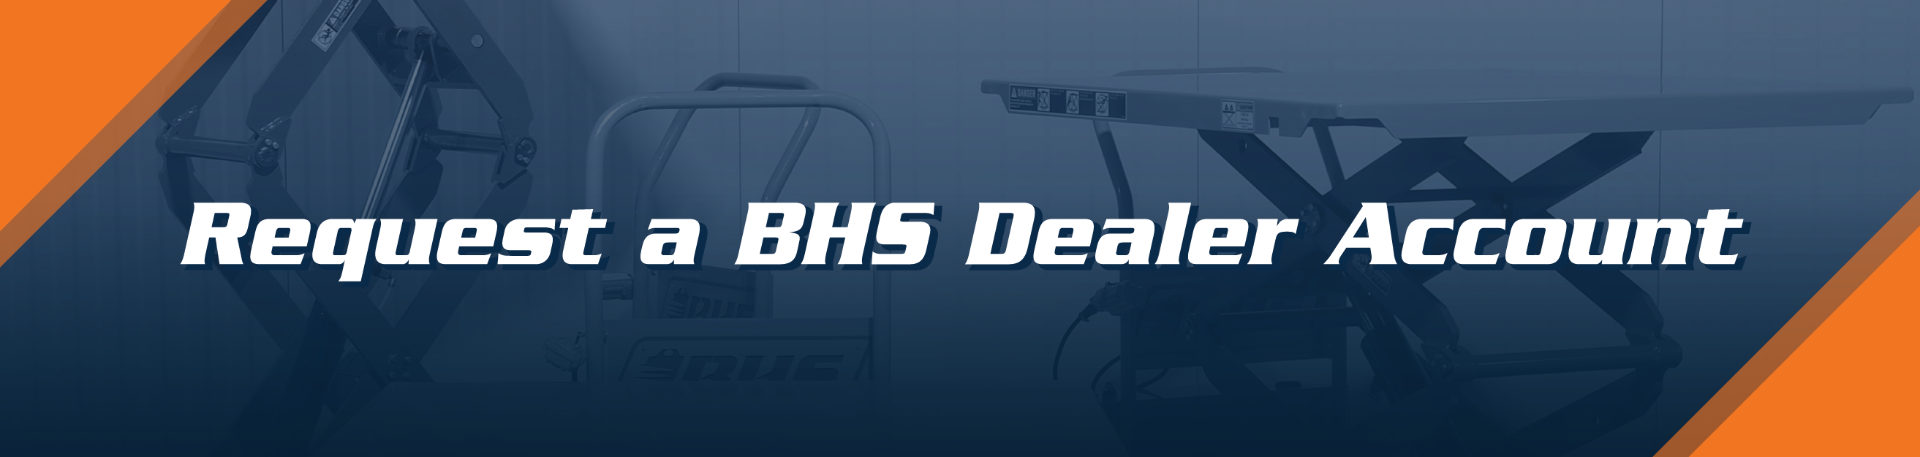 Request a BHS Dealer Account